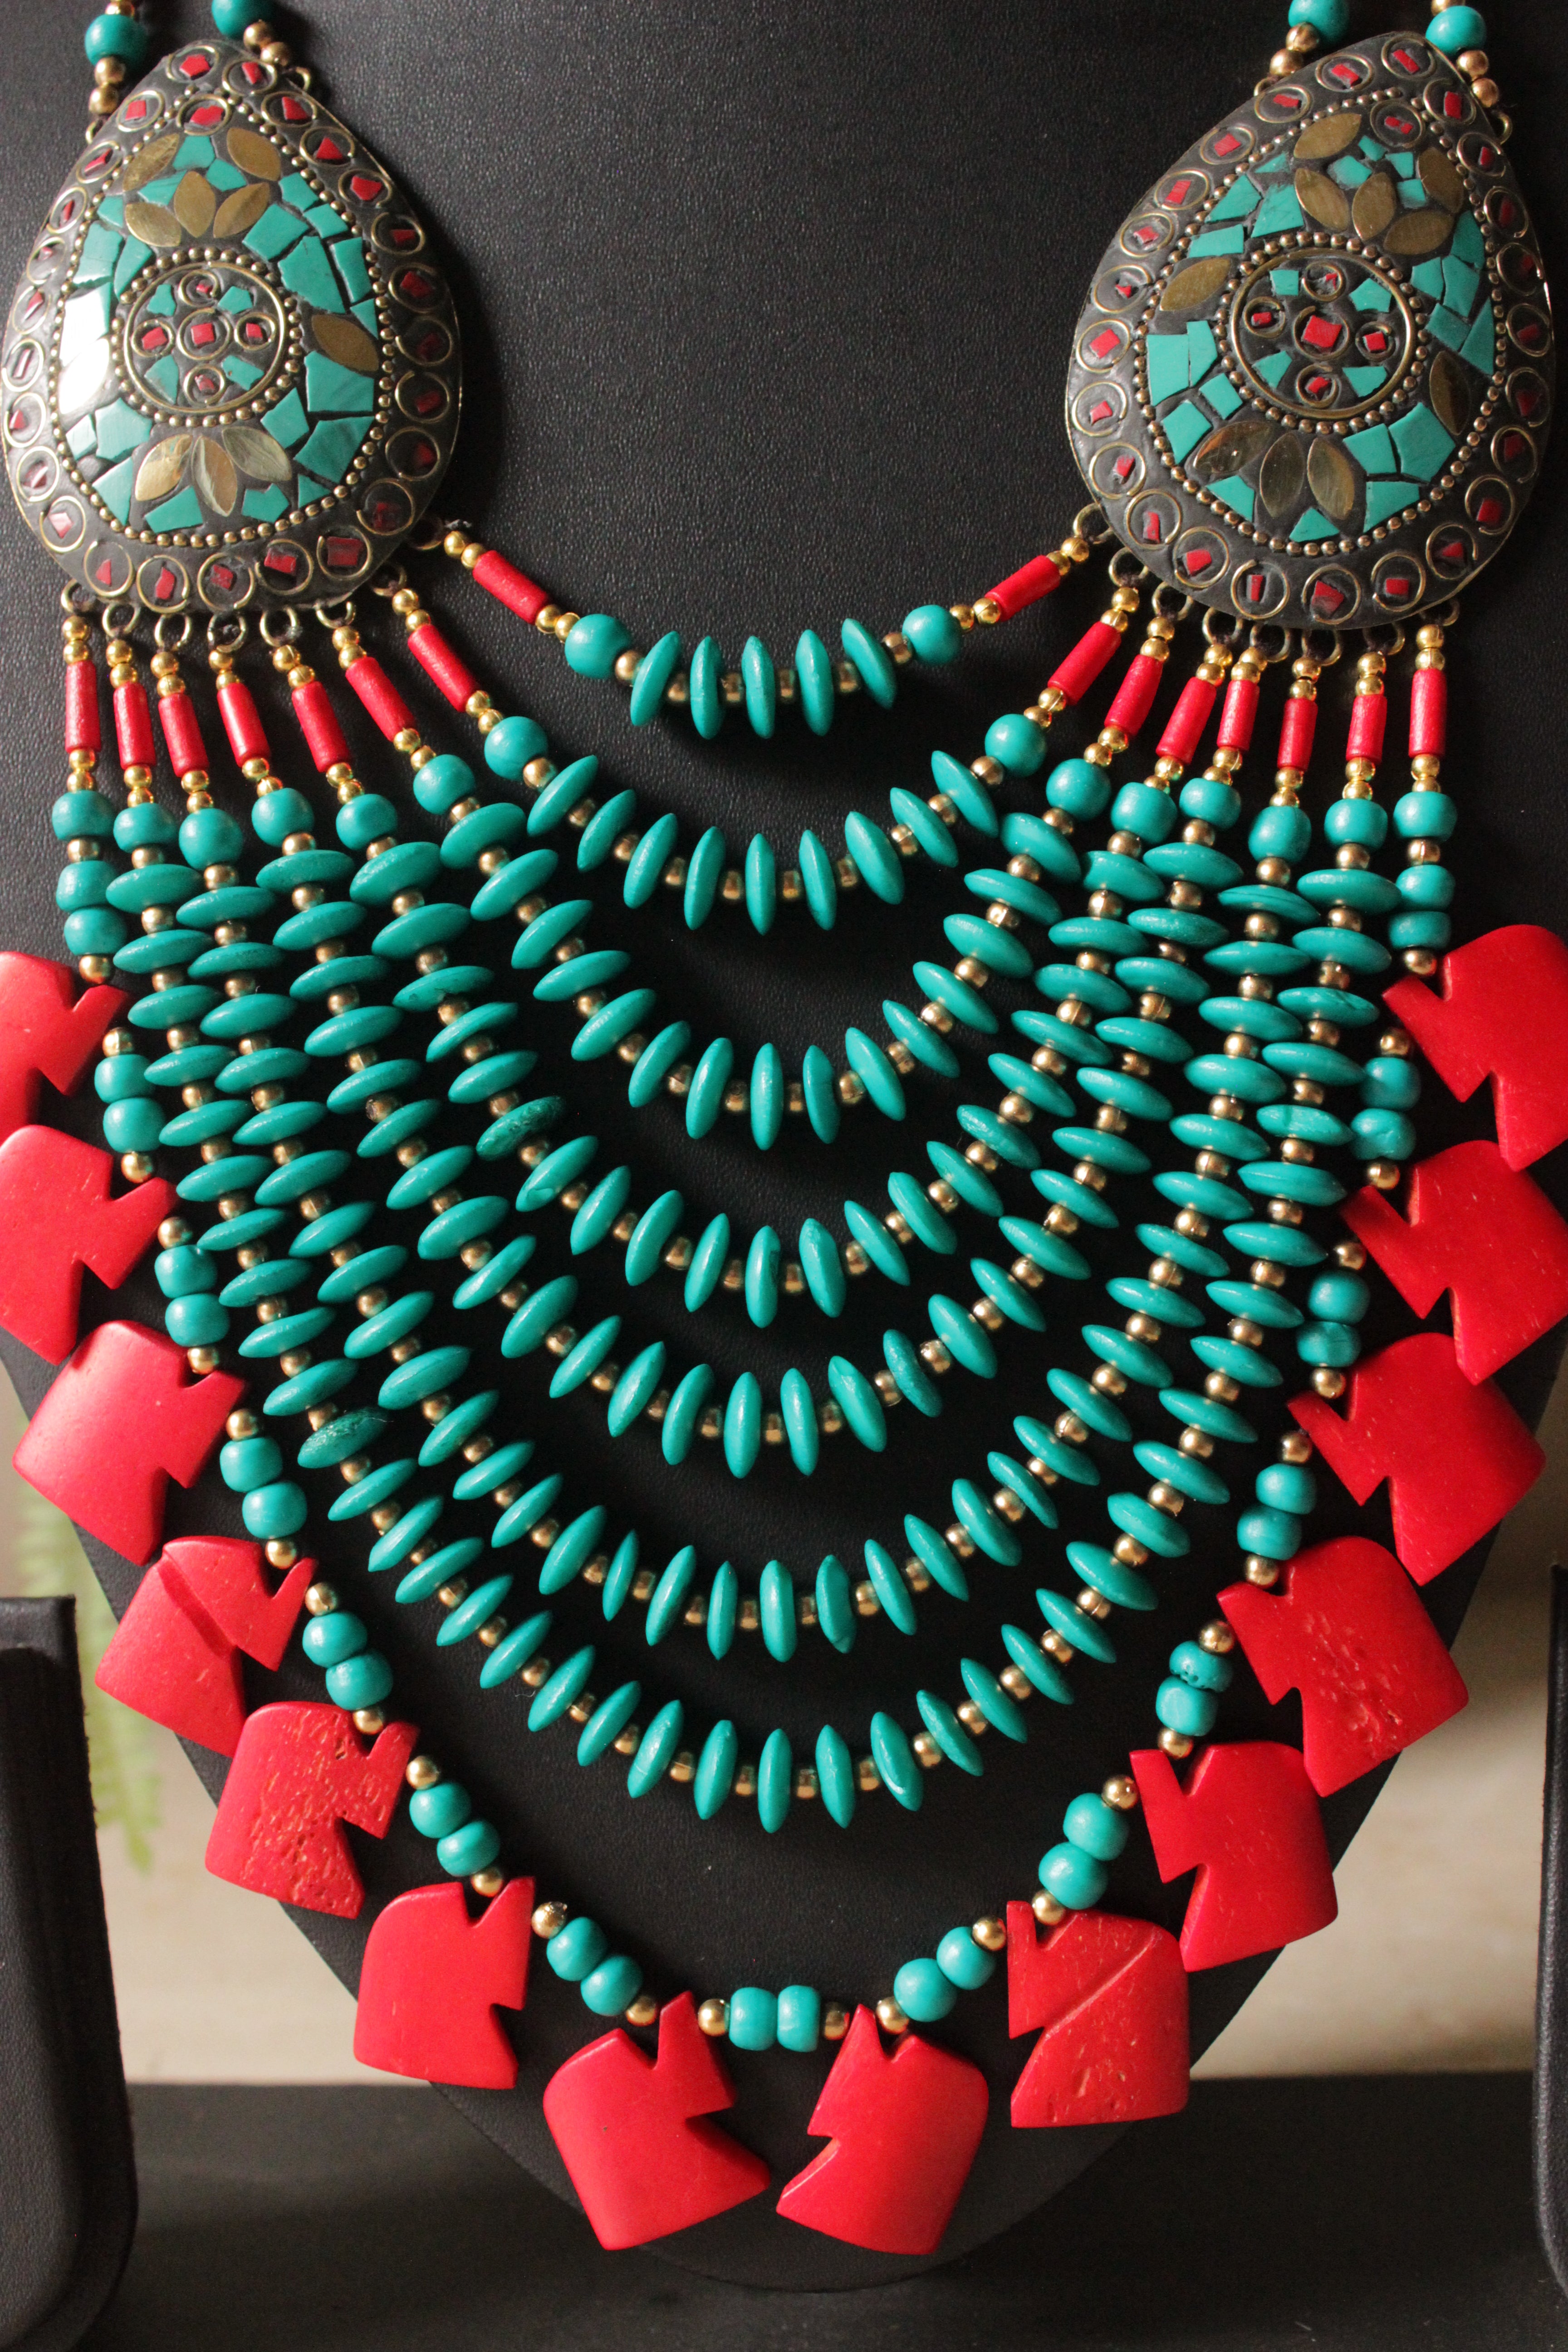 Turquoise & Red Wooden Beads Elephant Charms Tribal Motifs Handcrafted Statement African Tribal Necklace